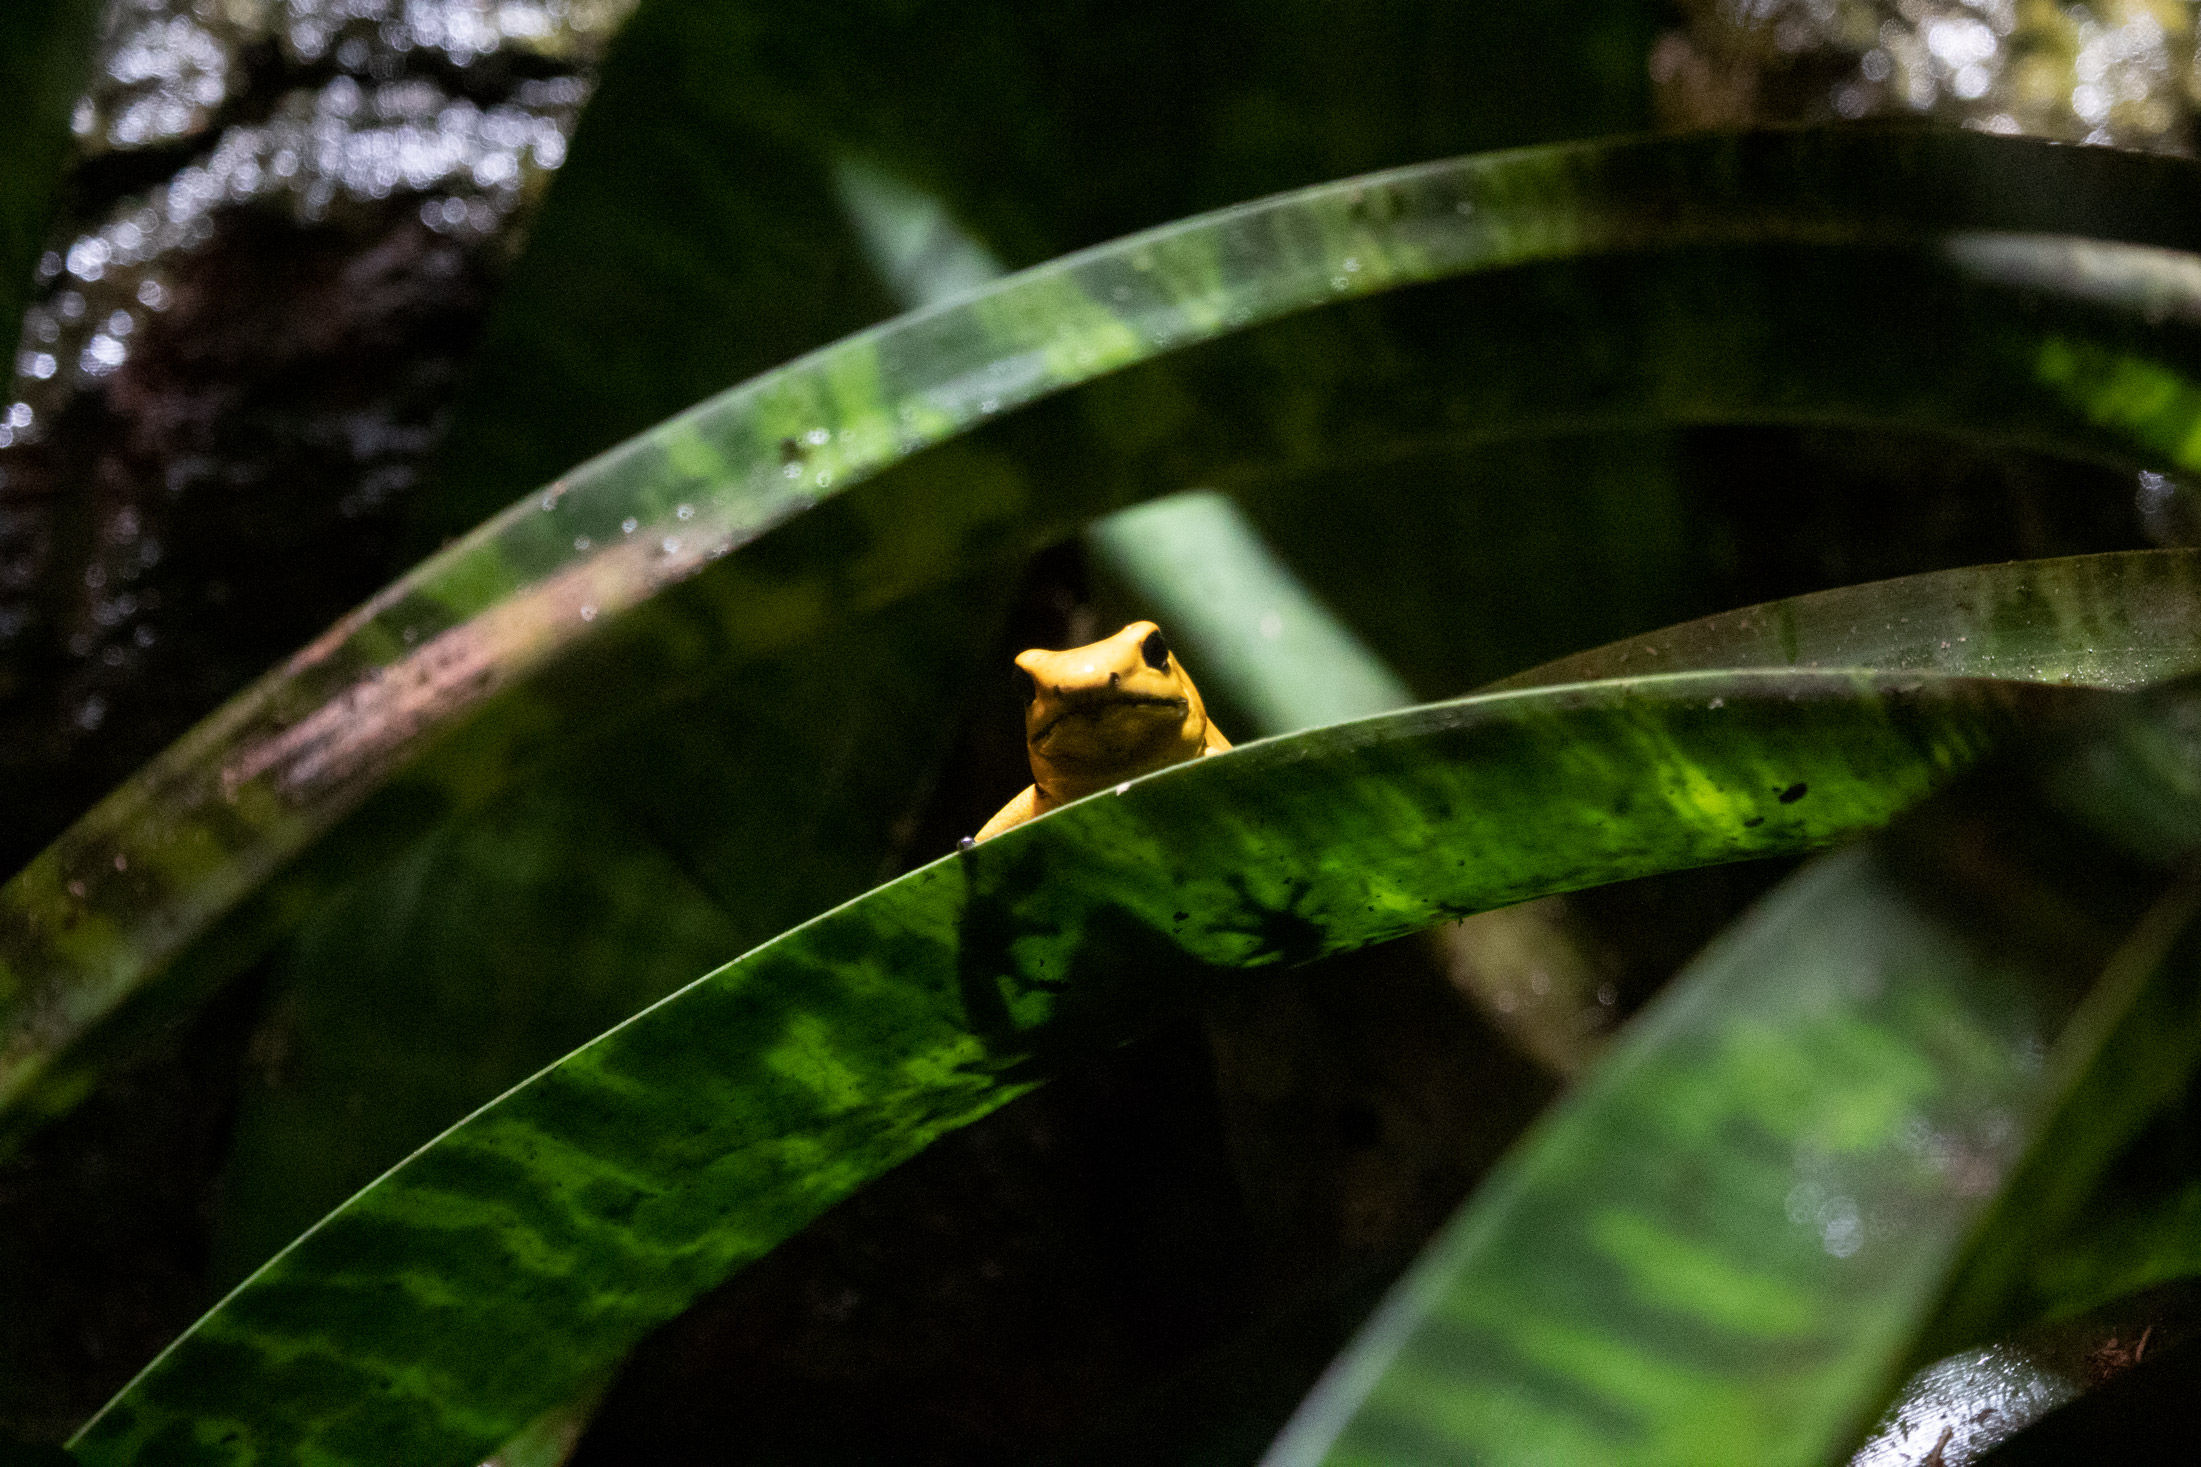 Small yellow frog sitting on a long green leaf